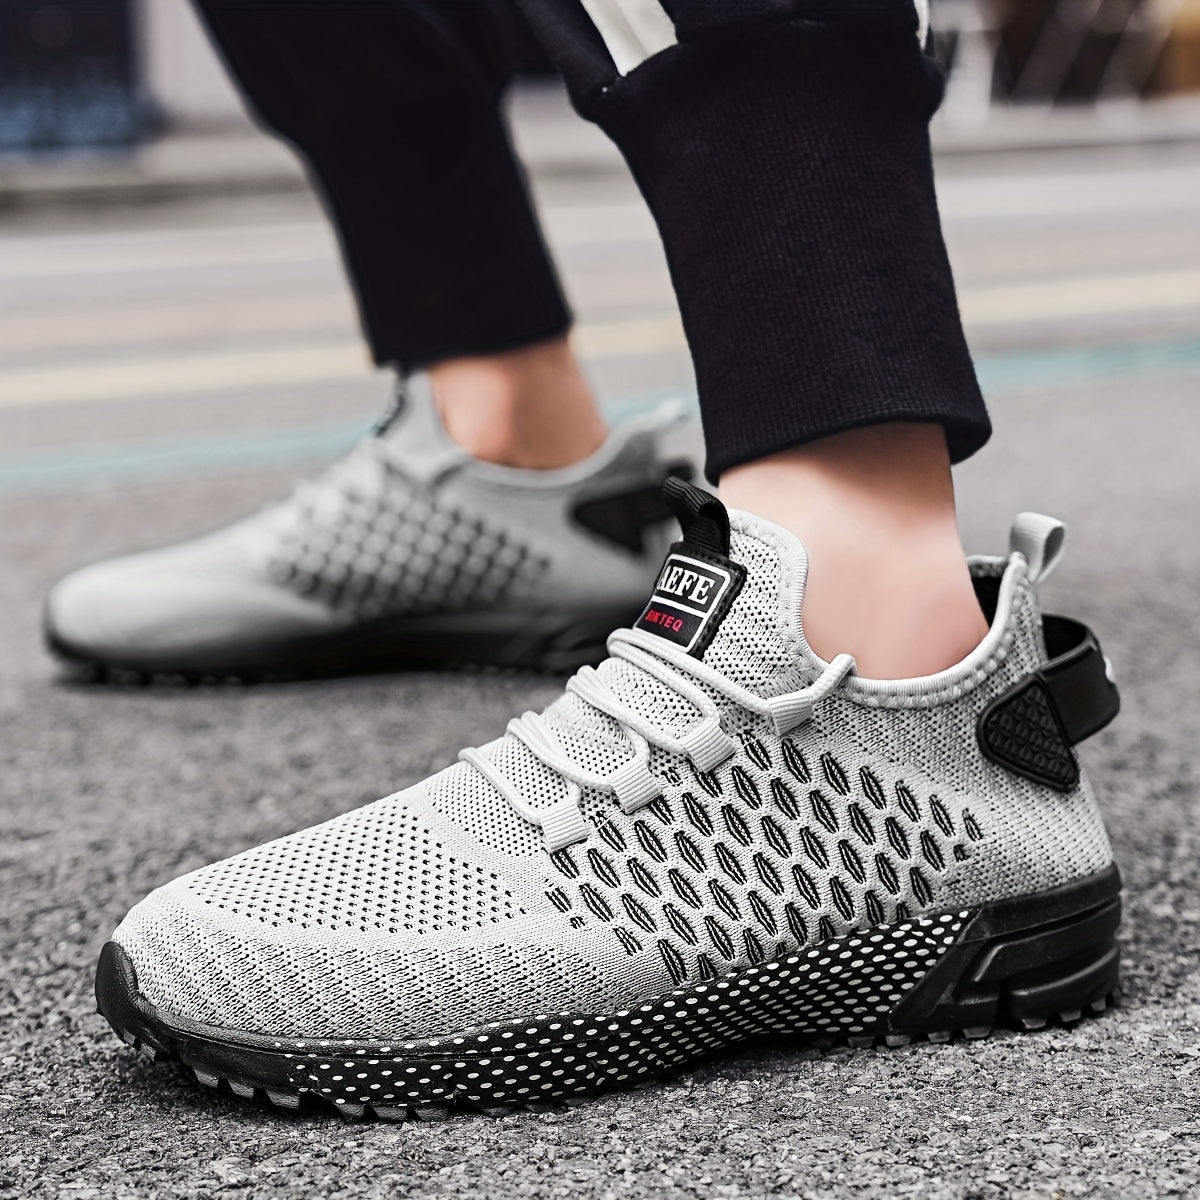 Men's Casual Geometric Print Breathable Mesh Lace-up Sneakers, Outdoor Anti-skid Shoes For Running Walking